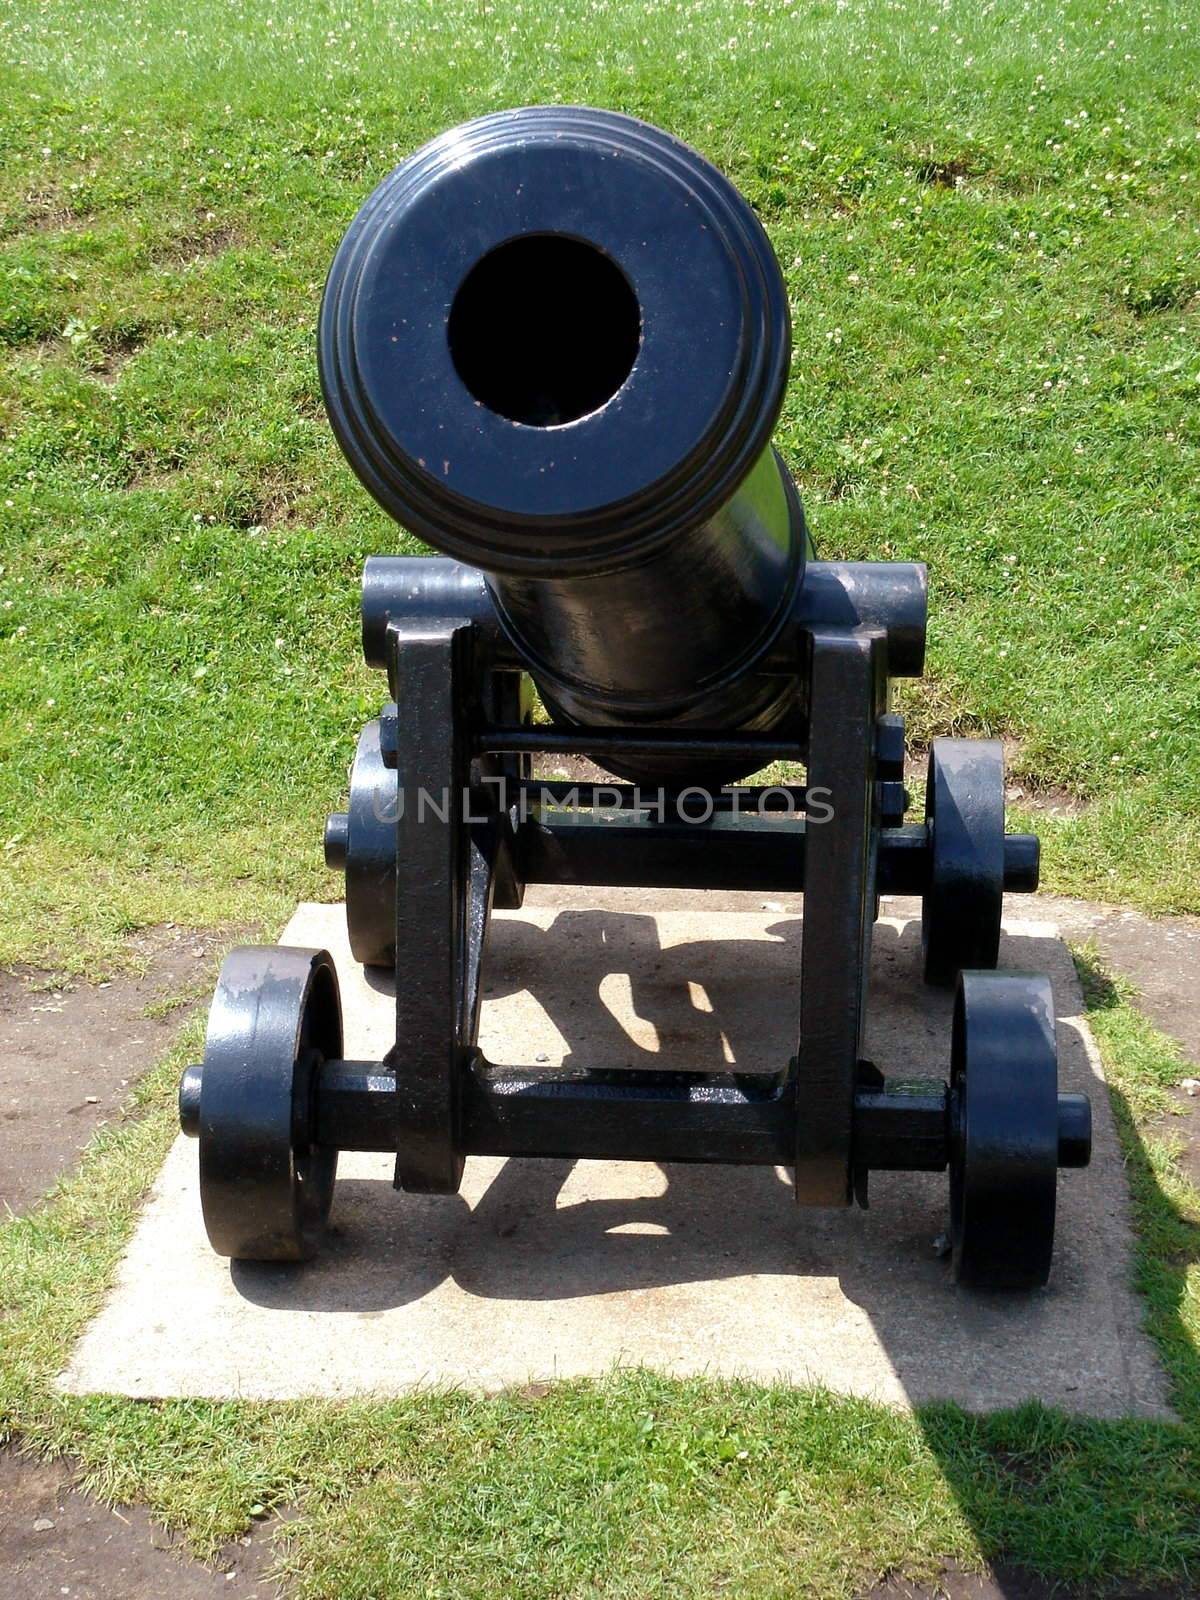 Black cannon on four wheels viewed from the front surrounded by green grass